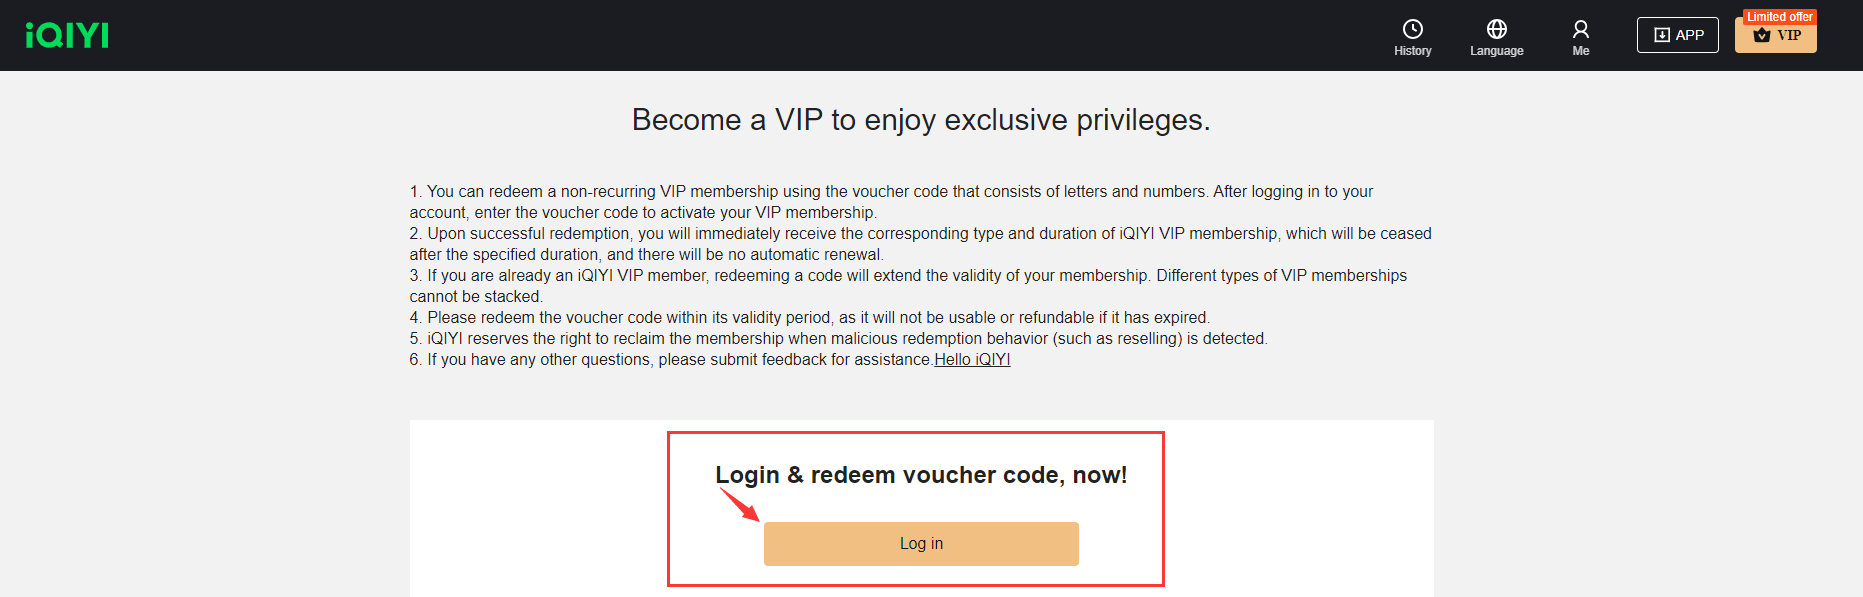 How to redeem the iQiyi VIP Voucher Code purchased from SEAGM? SEAGM